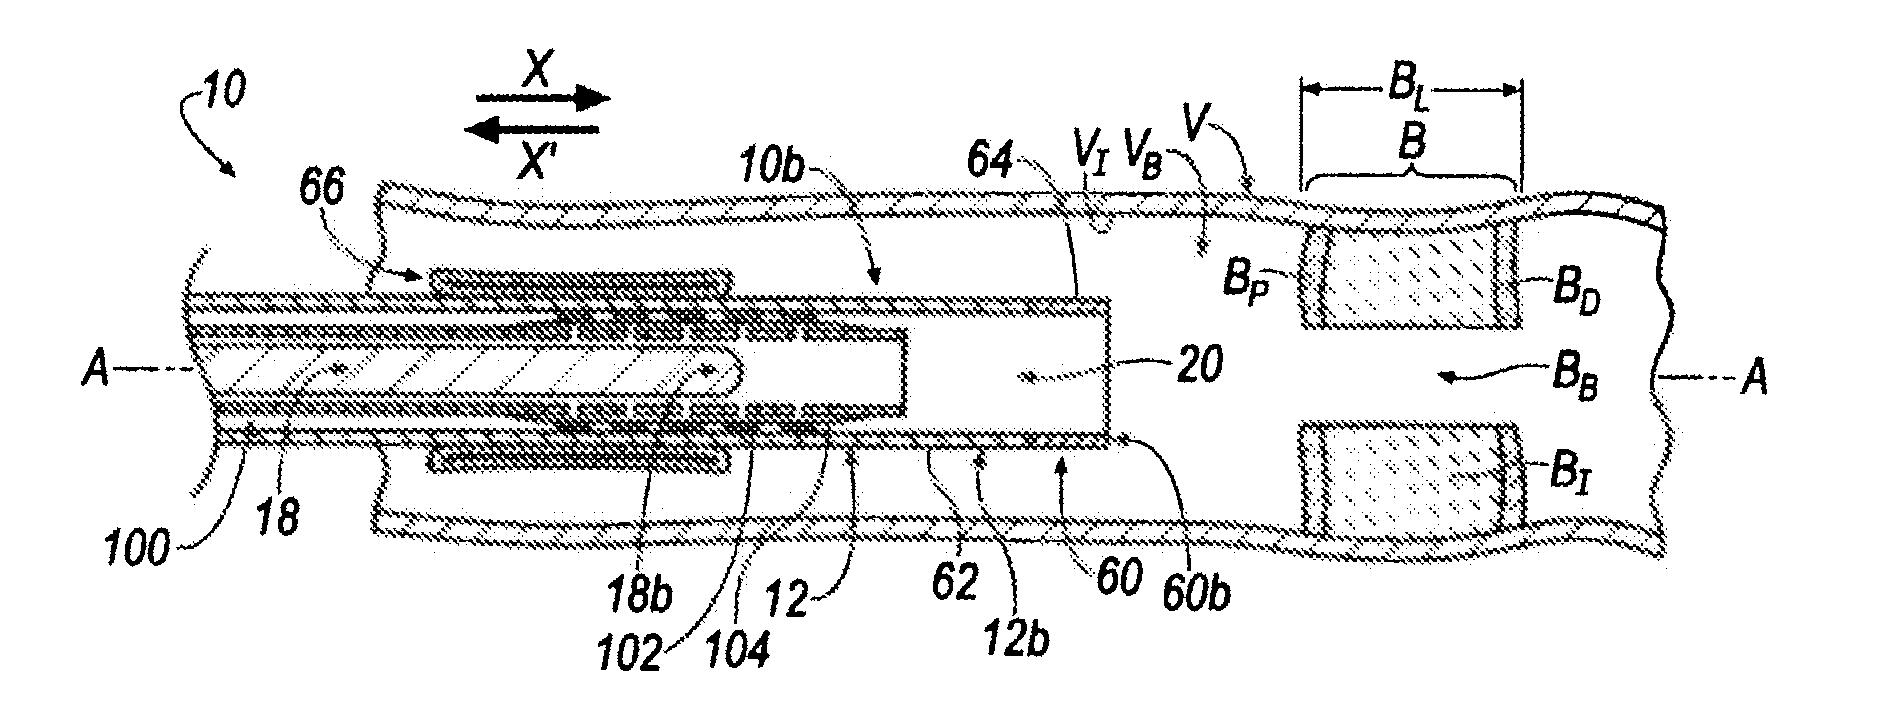 Revascularization Device for Treating an Occluded Arterial Vessel